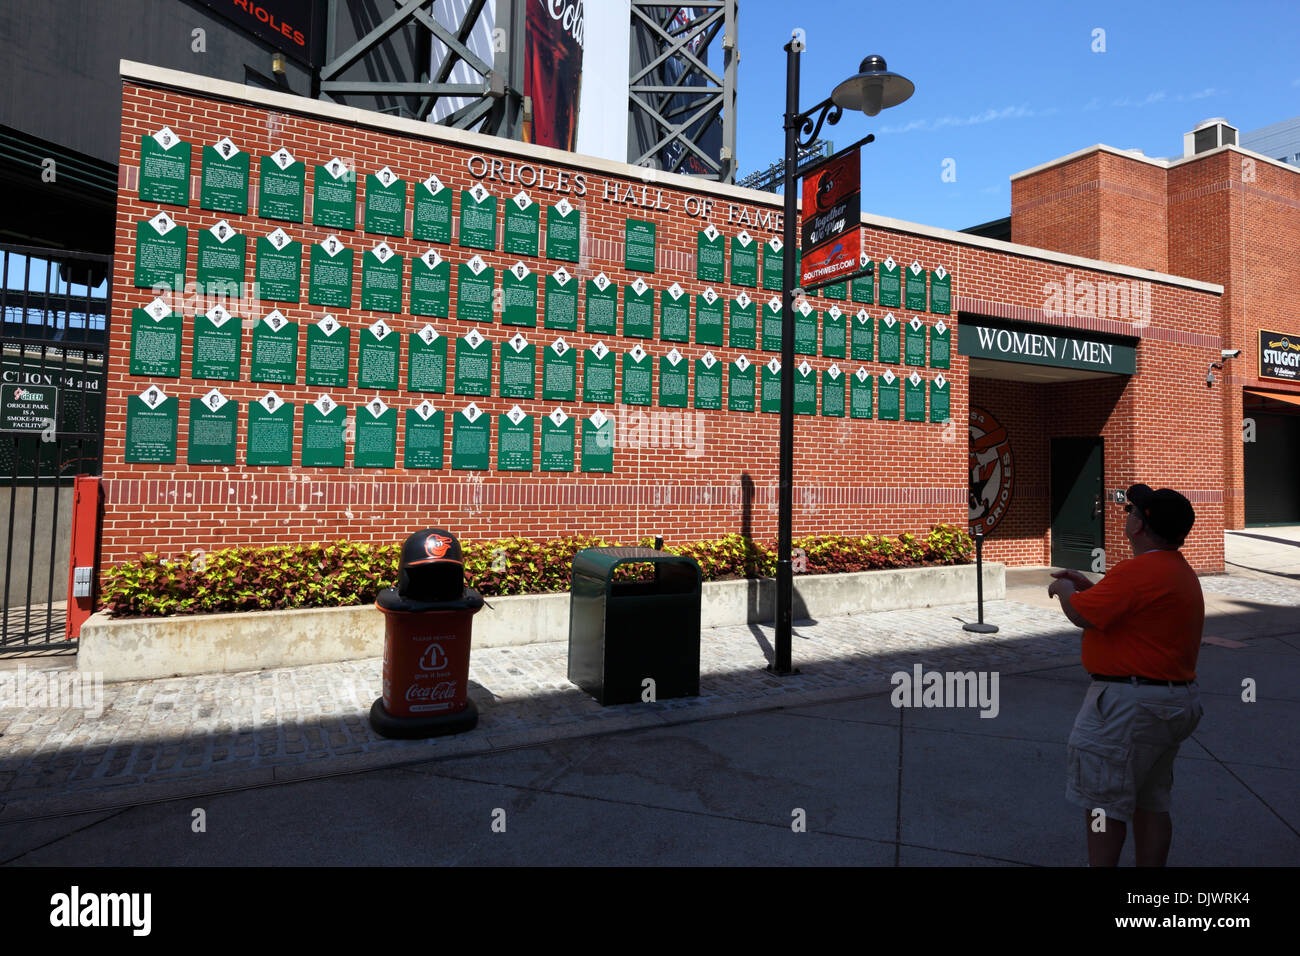 Fan looking at Hall of Fame in Oriole Park, home of Baltimore Orioles baseball team, Camden Yards Sports Complex, Baltimore, USA Stock Photo